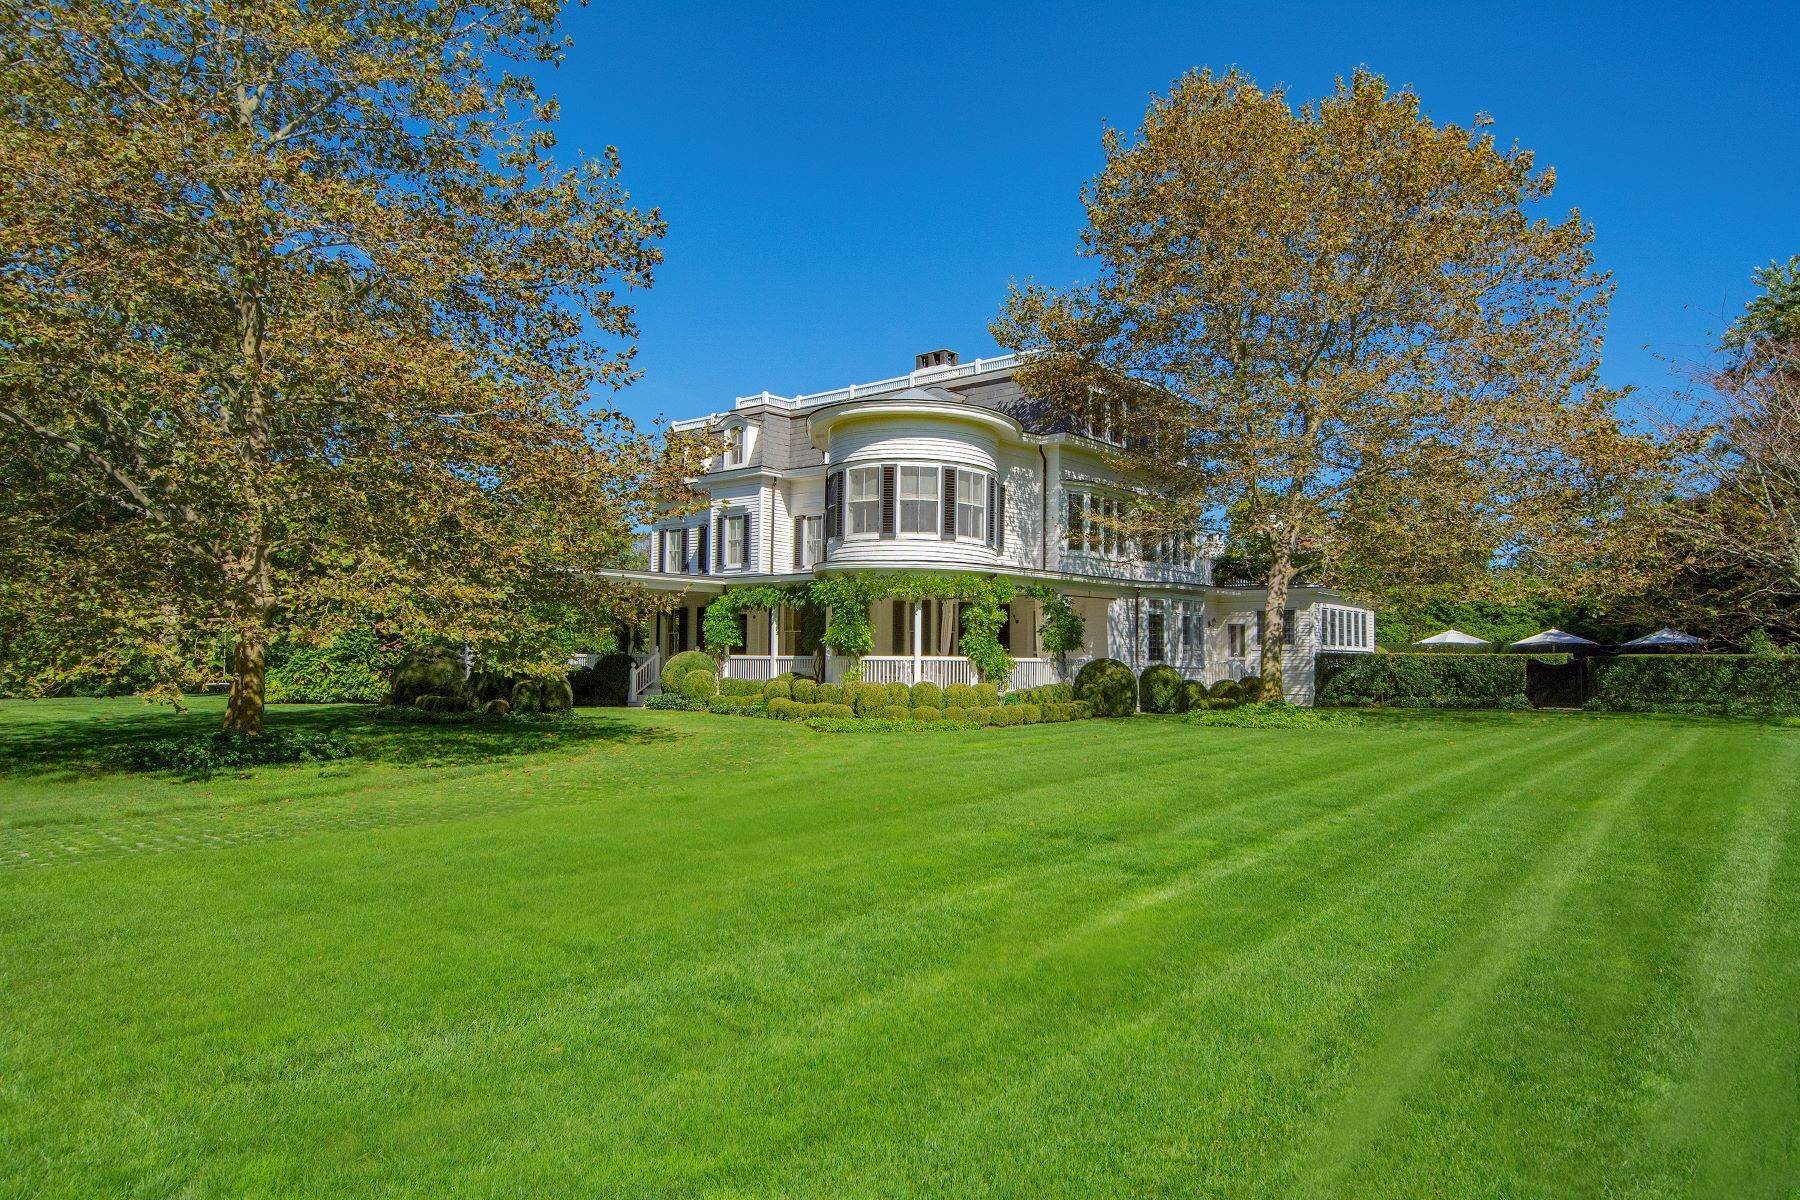 Single Family Homes for Sale at Historic Southampton Village With Pool 172 South Main Street Southampton, New York 11968 United States